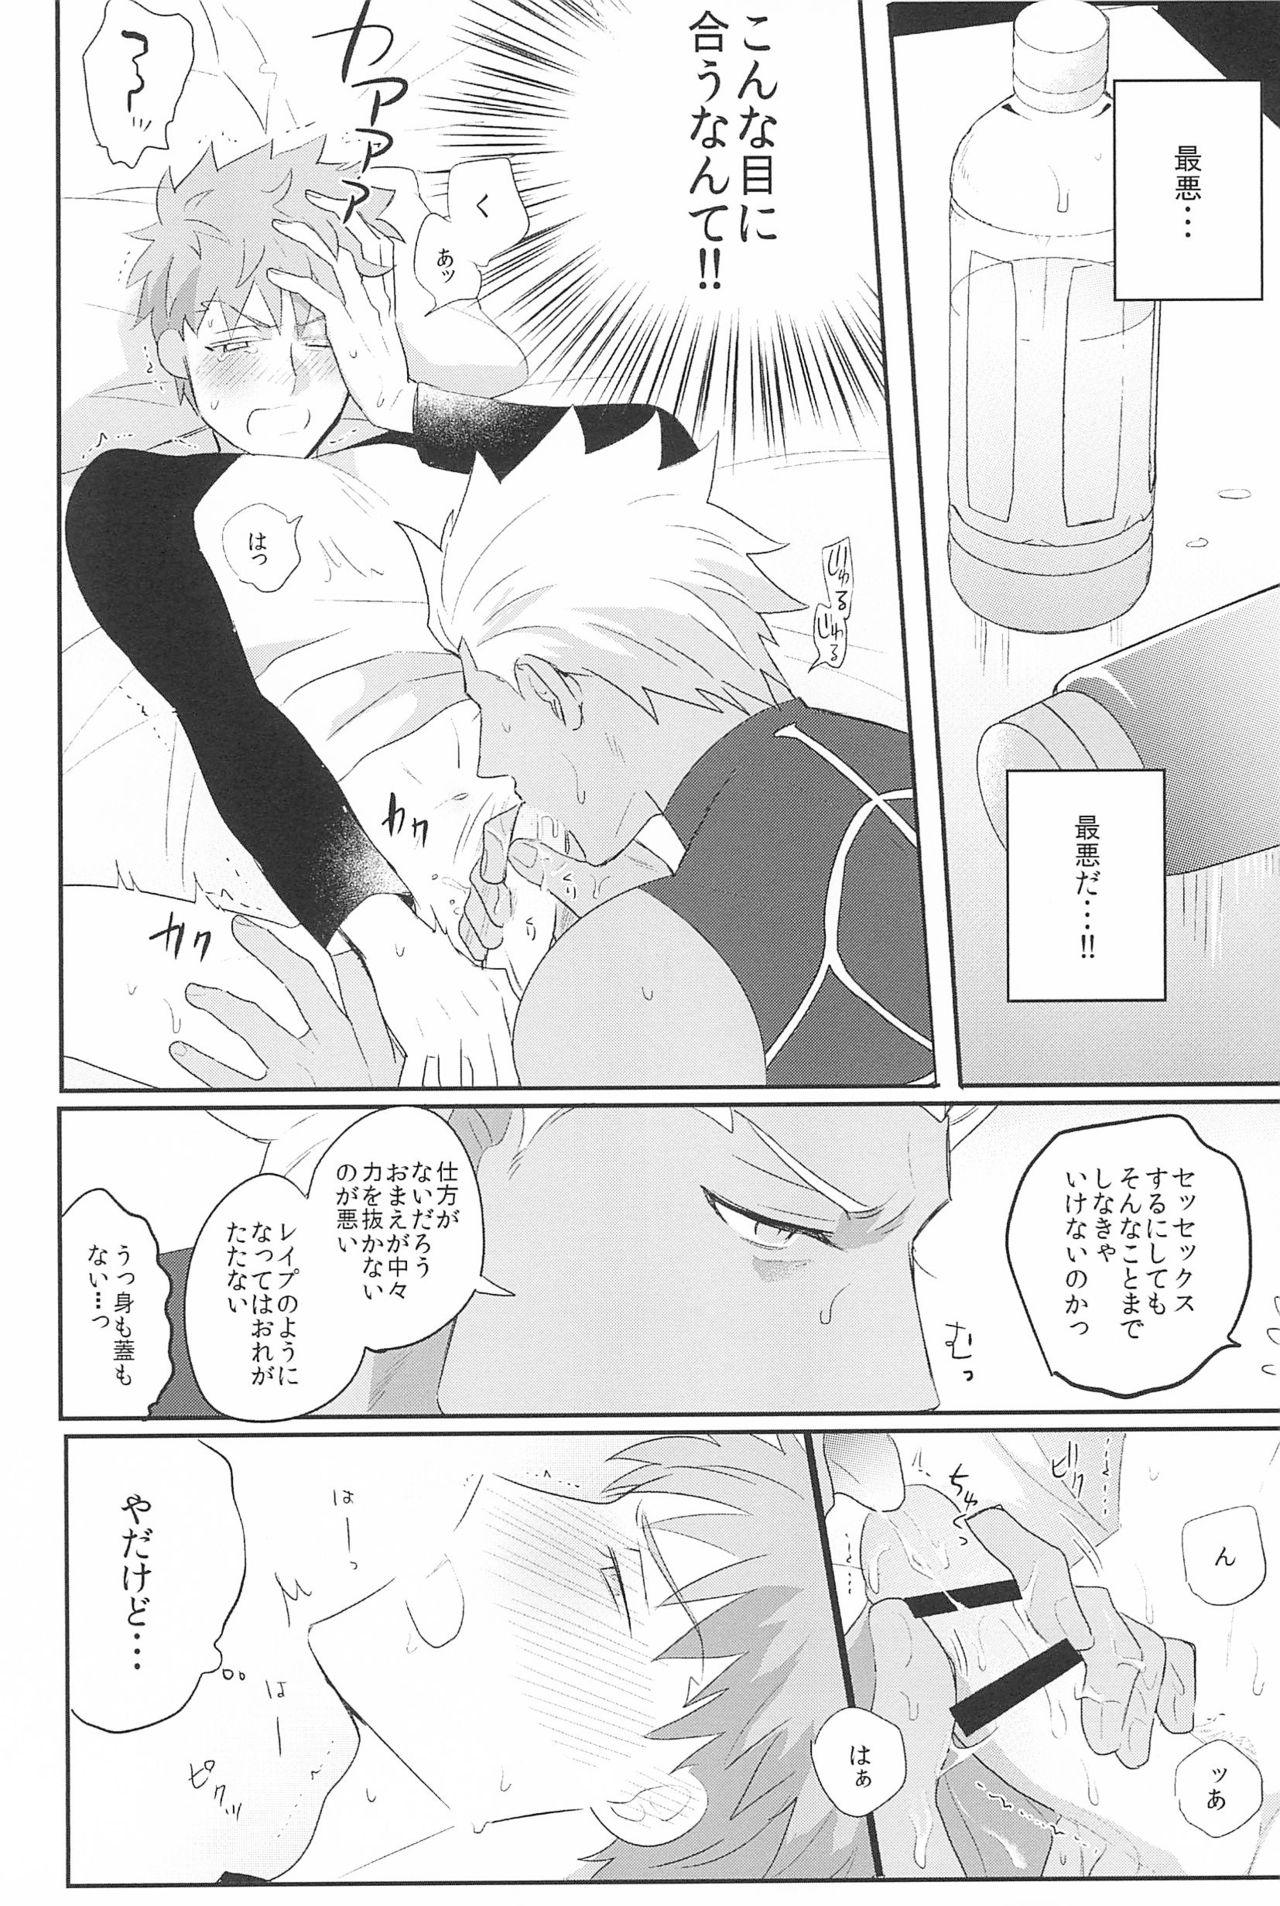 Gym Dive Archer - Fate stay night Masterbate - Page 12